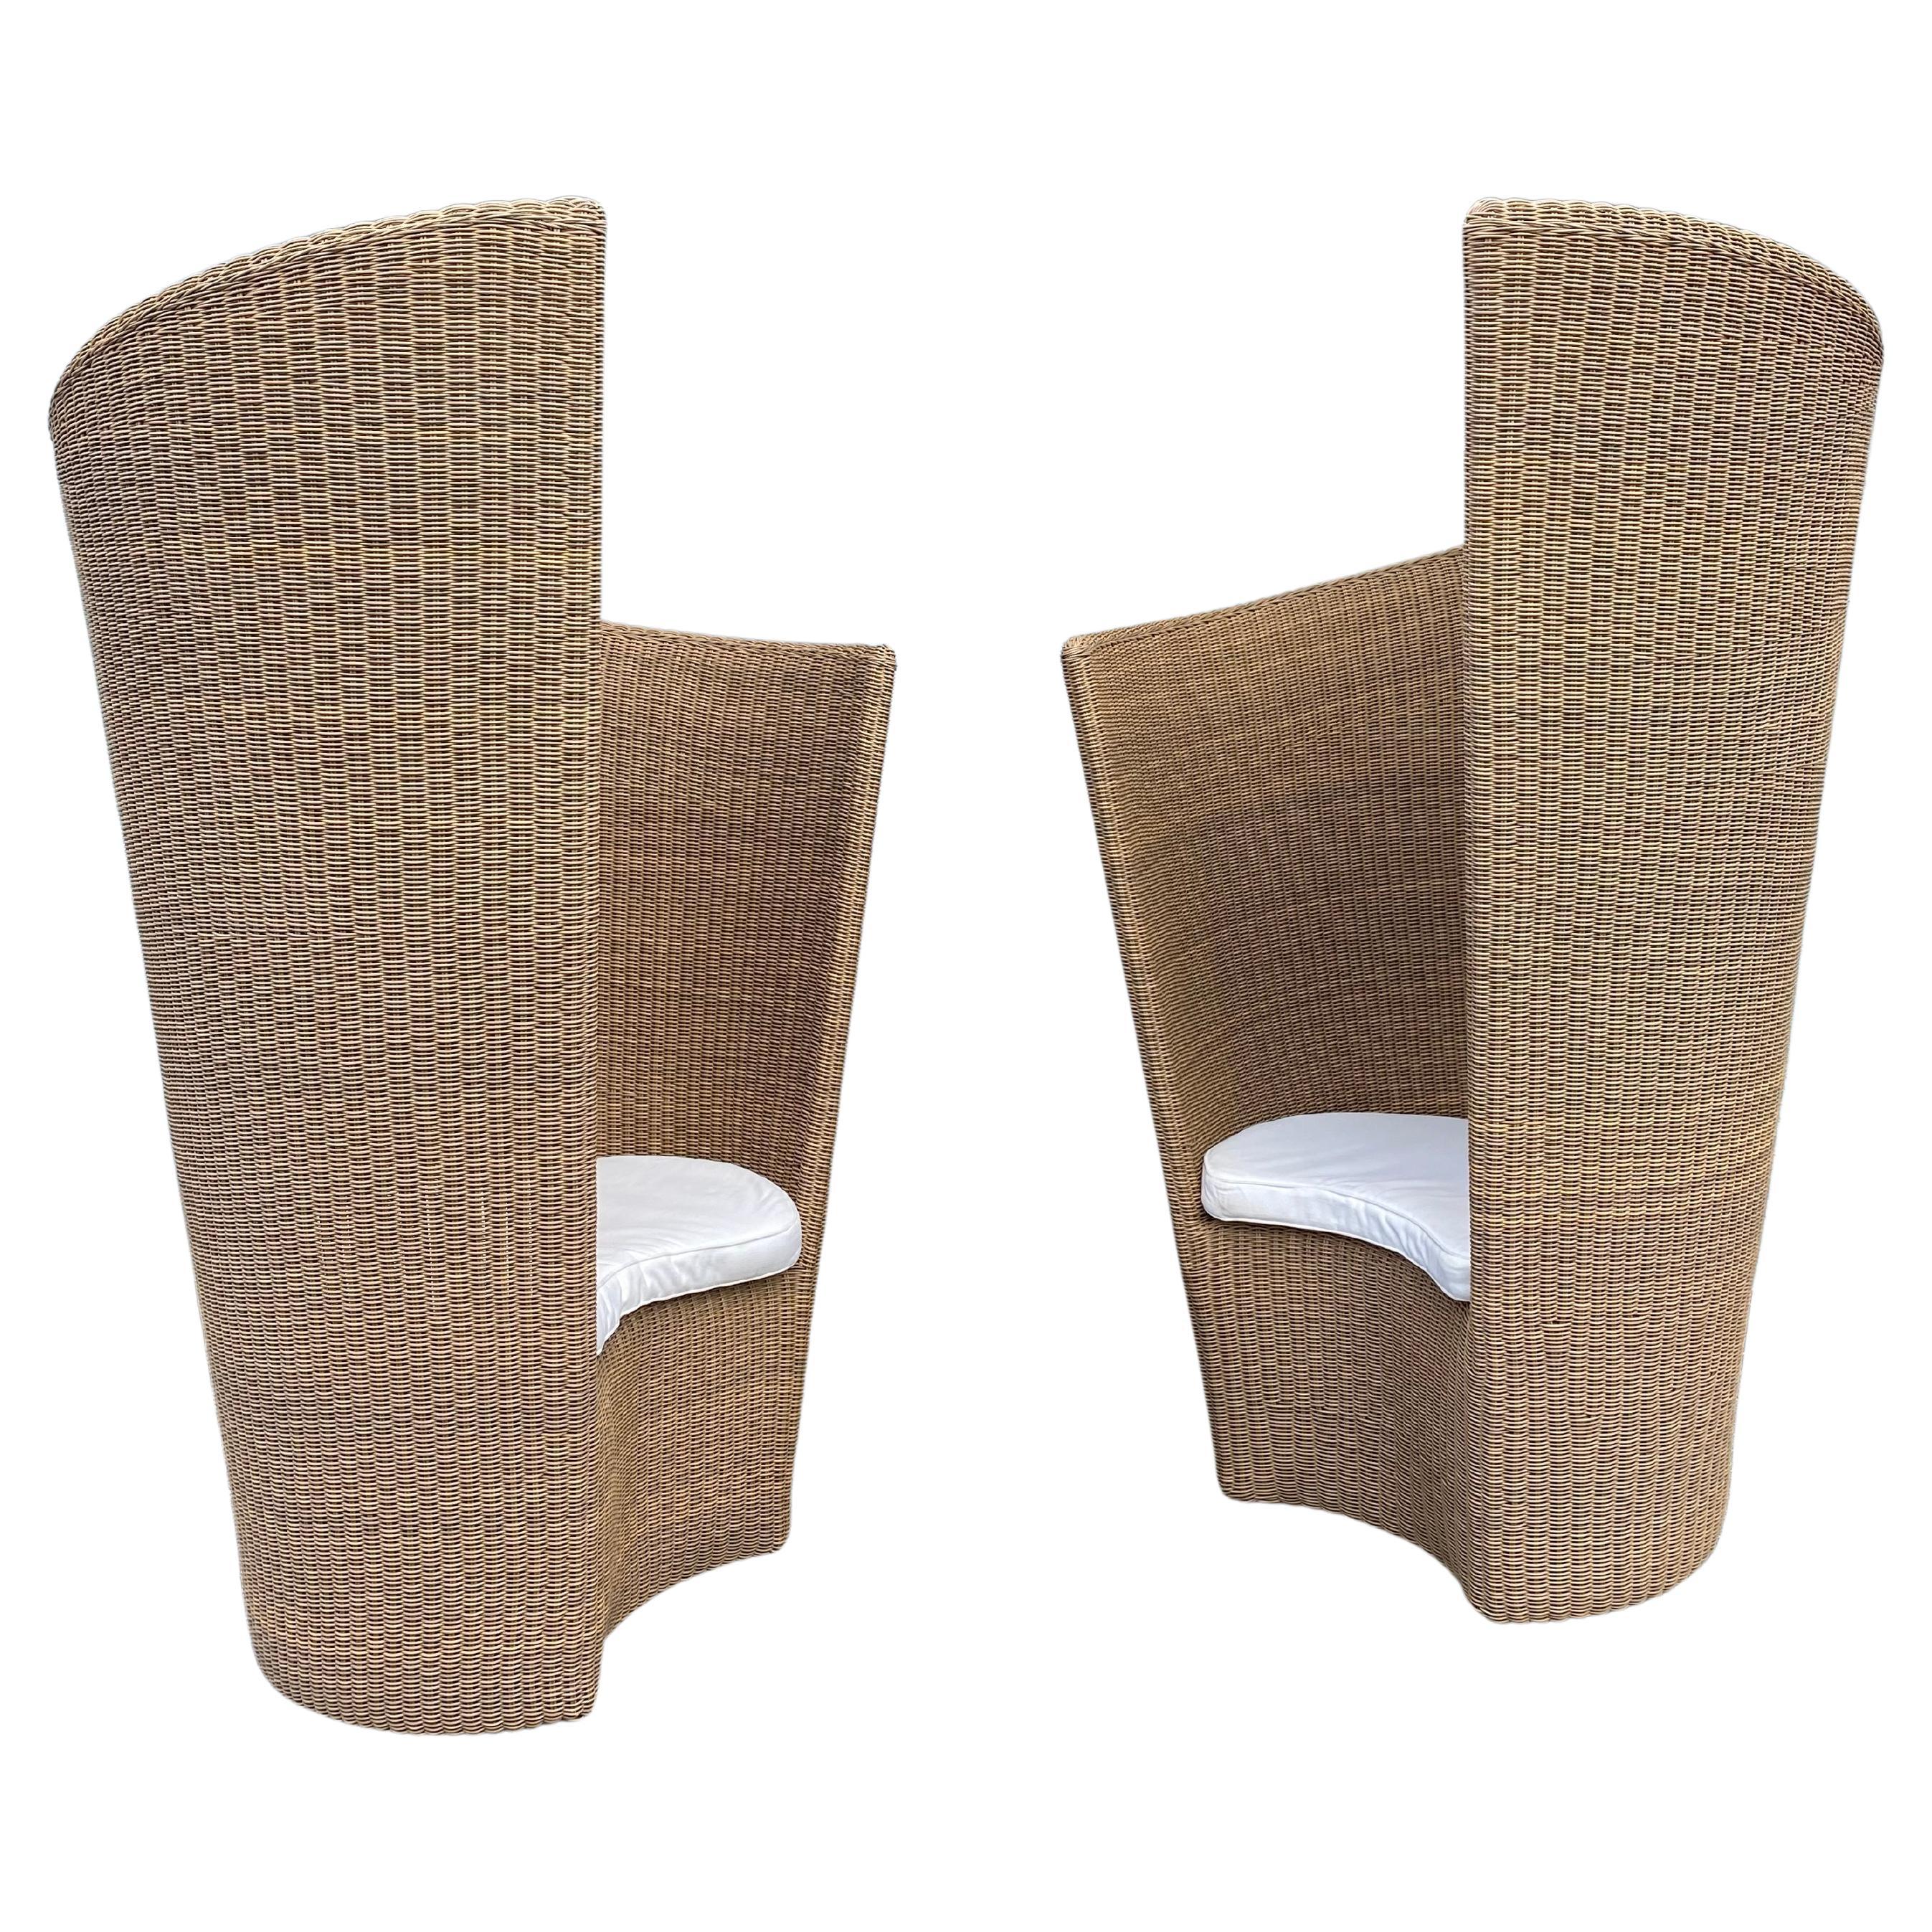 Rare Freeline Monumental Sculptural Rattan Chairs, Set of 2 For Sale